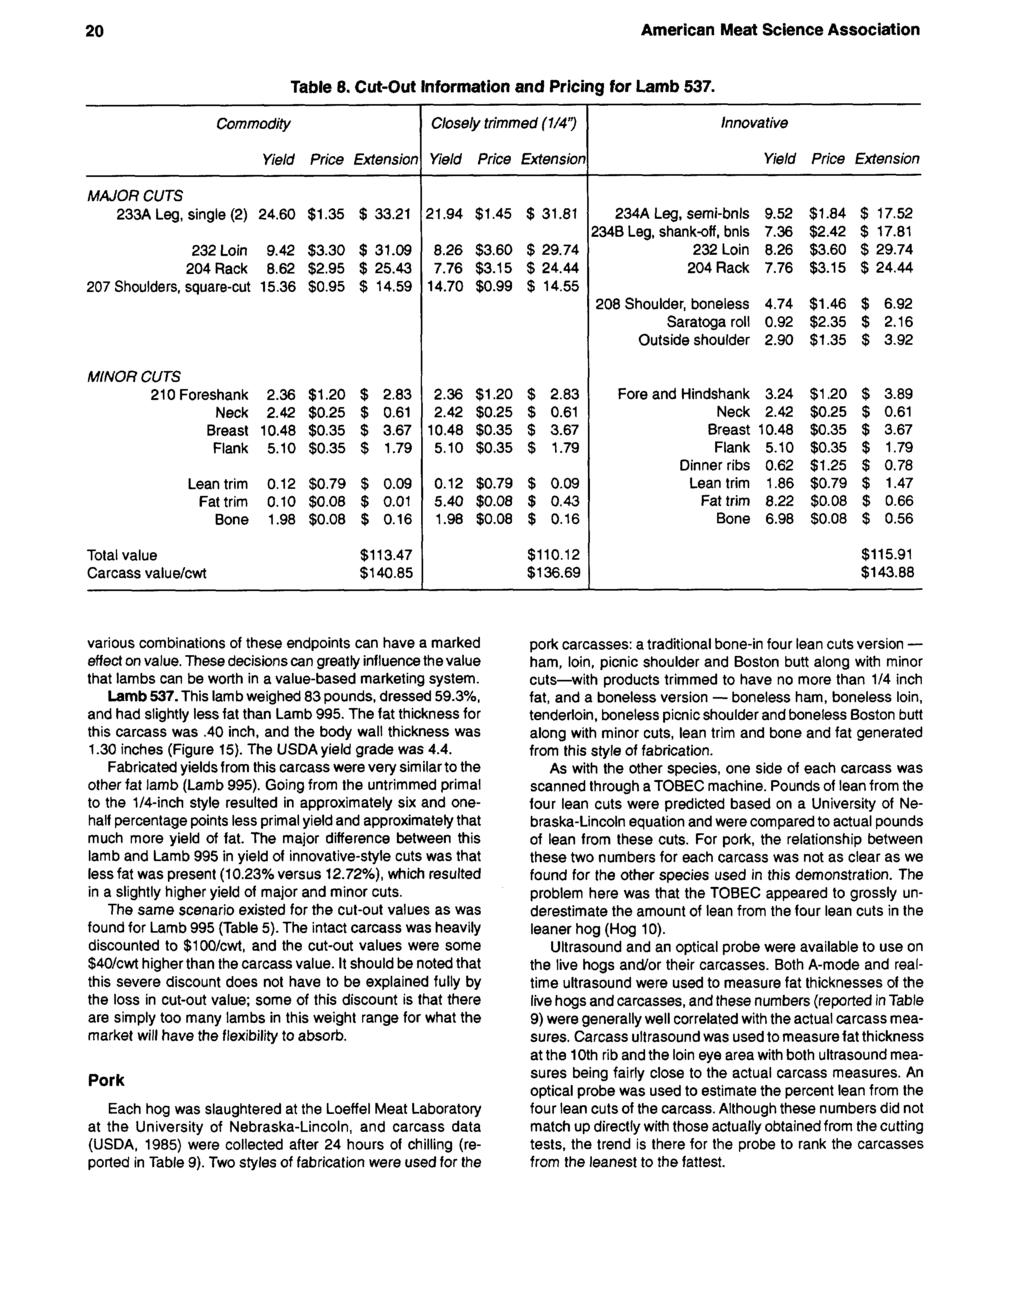 20 American Meat Science Association Table 8. Cut-Out Information and Pricing for Lamb 537. Commodity Yield Price Extensior; MAJOR CUTS 233A Leg, single (2) 24.60 $1.35 $ 33.21 232 Loin 9.42 $3.